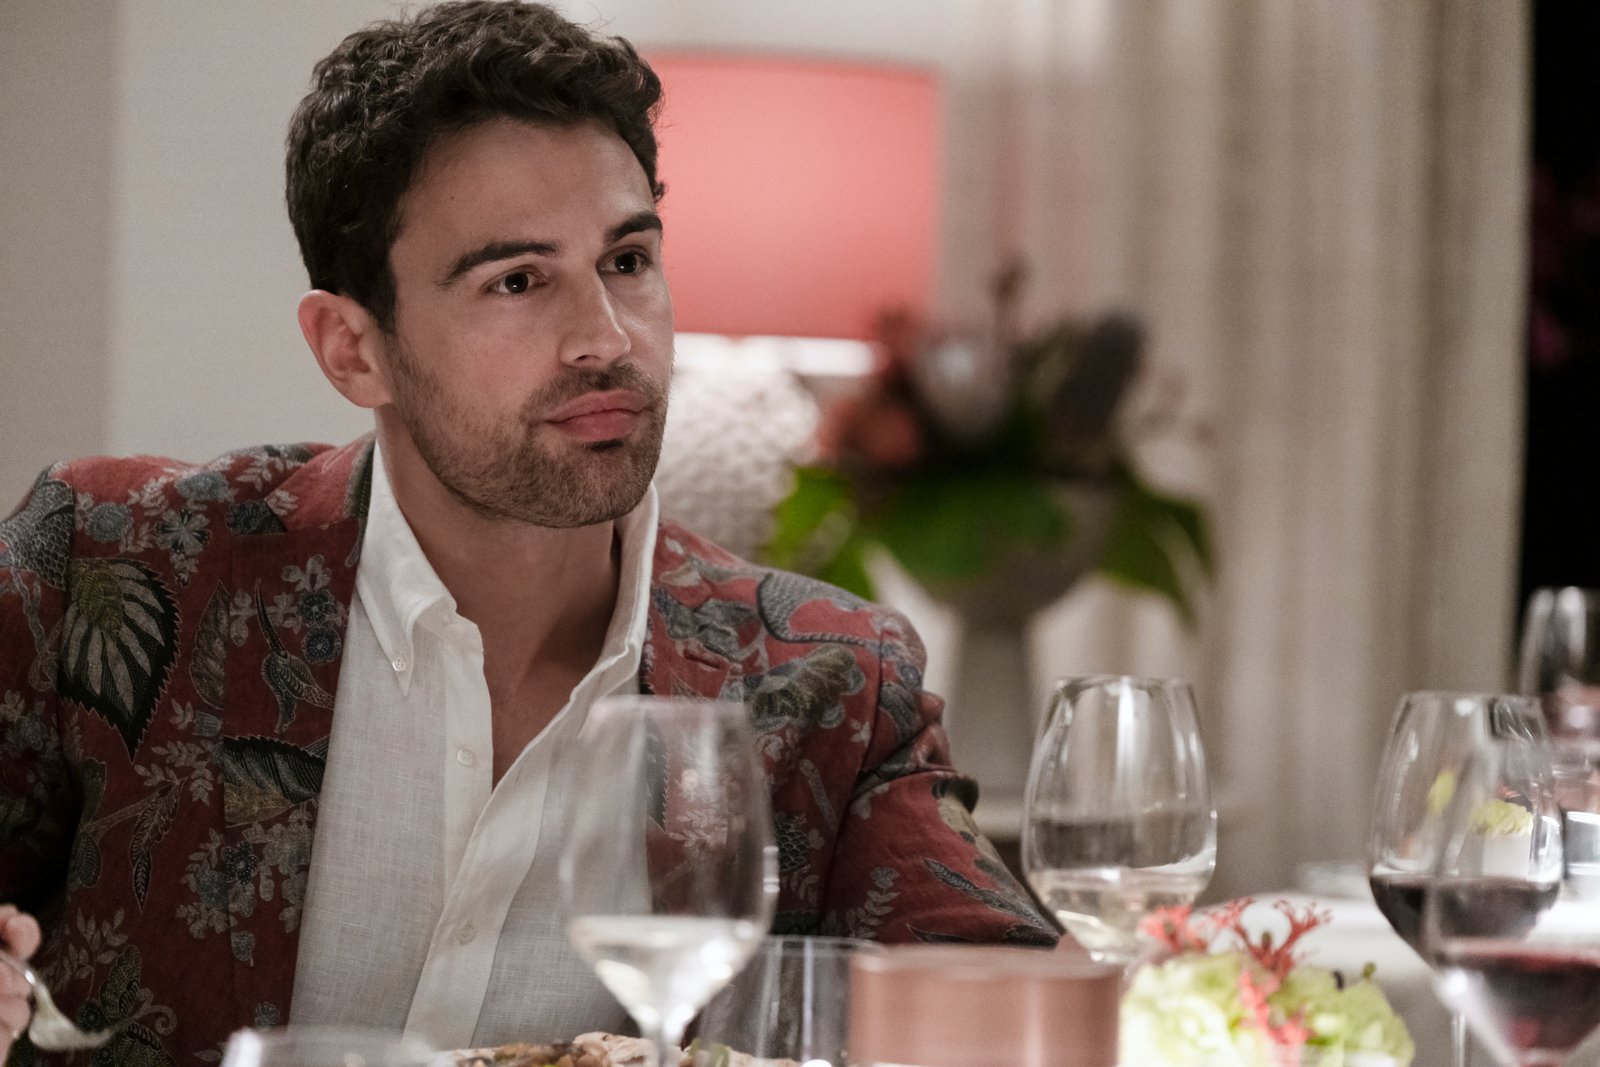 Theo James as Cameron in 'The White Lotus' Season 2 for our article about the finale. He's wearing a white shirt, sitting at a dinner table, and looking at someone off-screen.